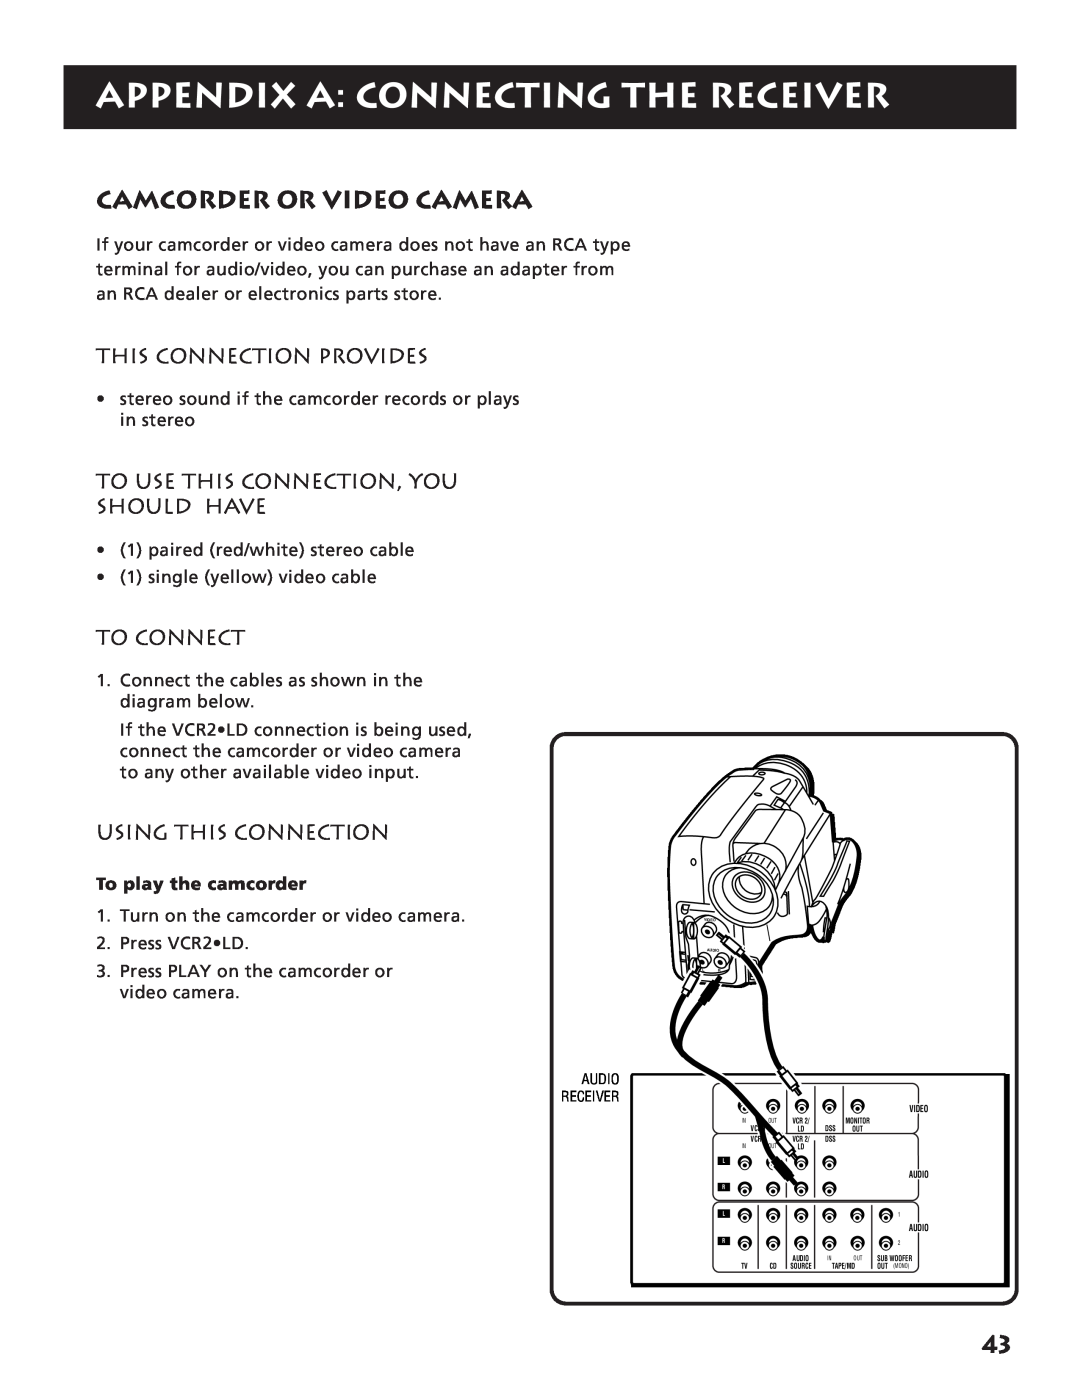 RCA RV3693 manual Camcorder Or Video Camera, Appendix A Connecting The Receiver, To play the camcorder 